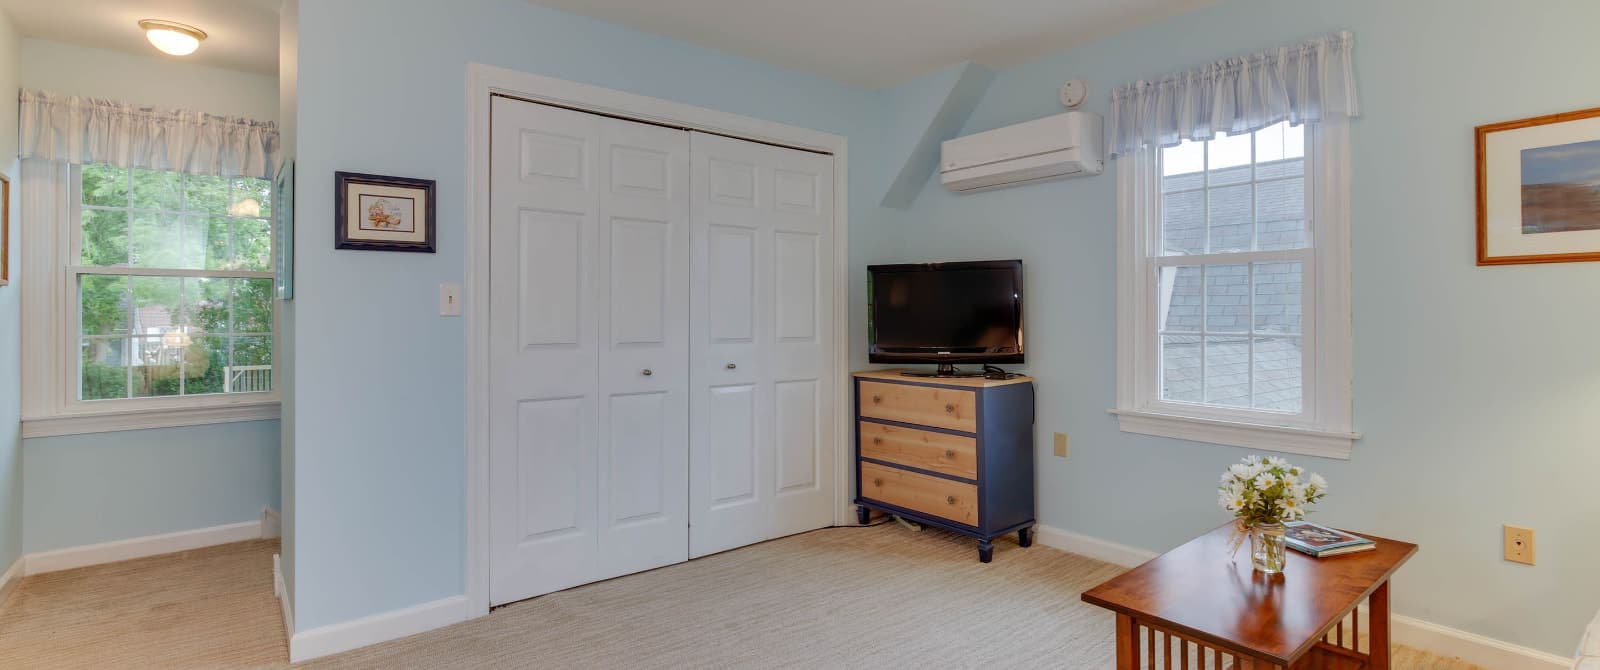 Suite with light blue walls, carpeting, wood coffee table, flatscreen TV, and white closet doors